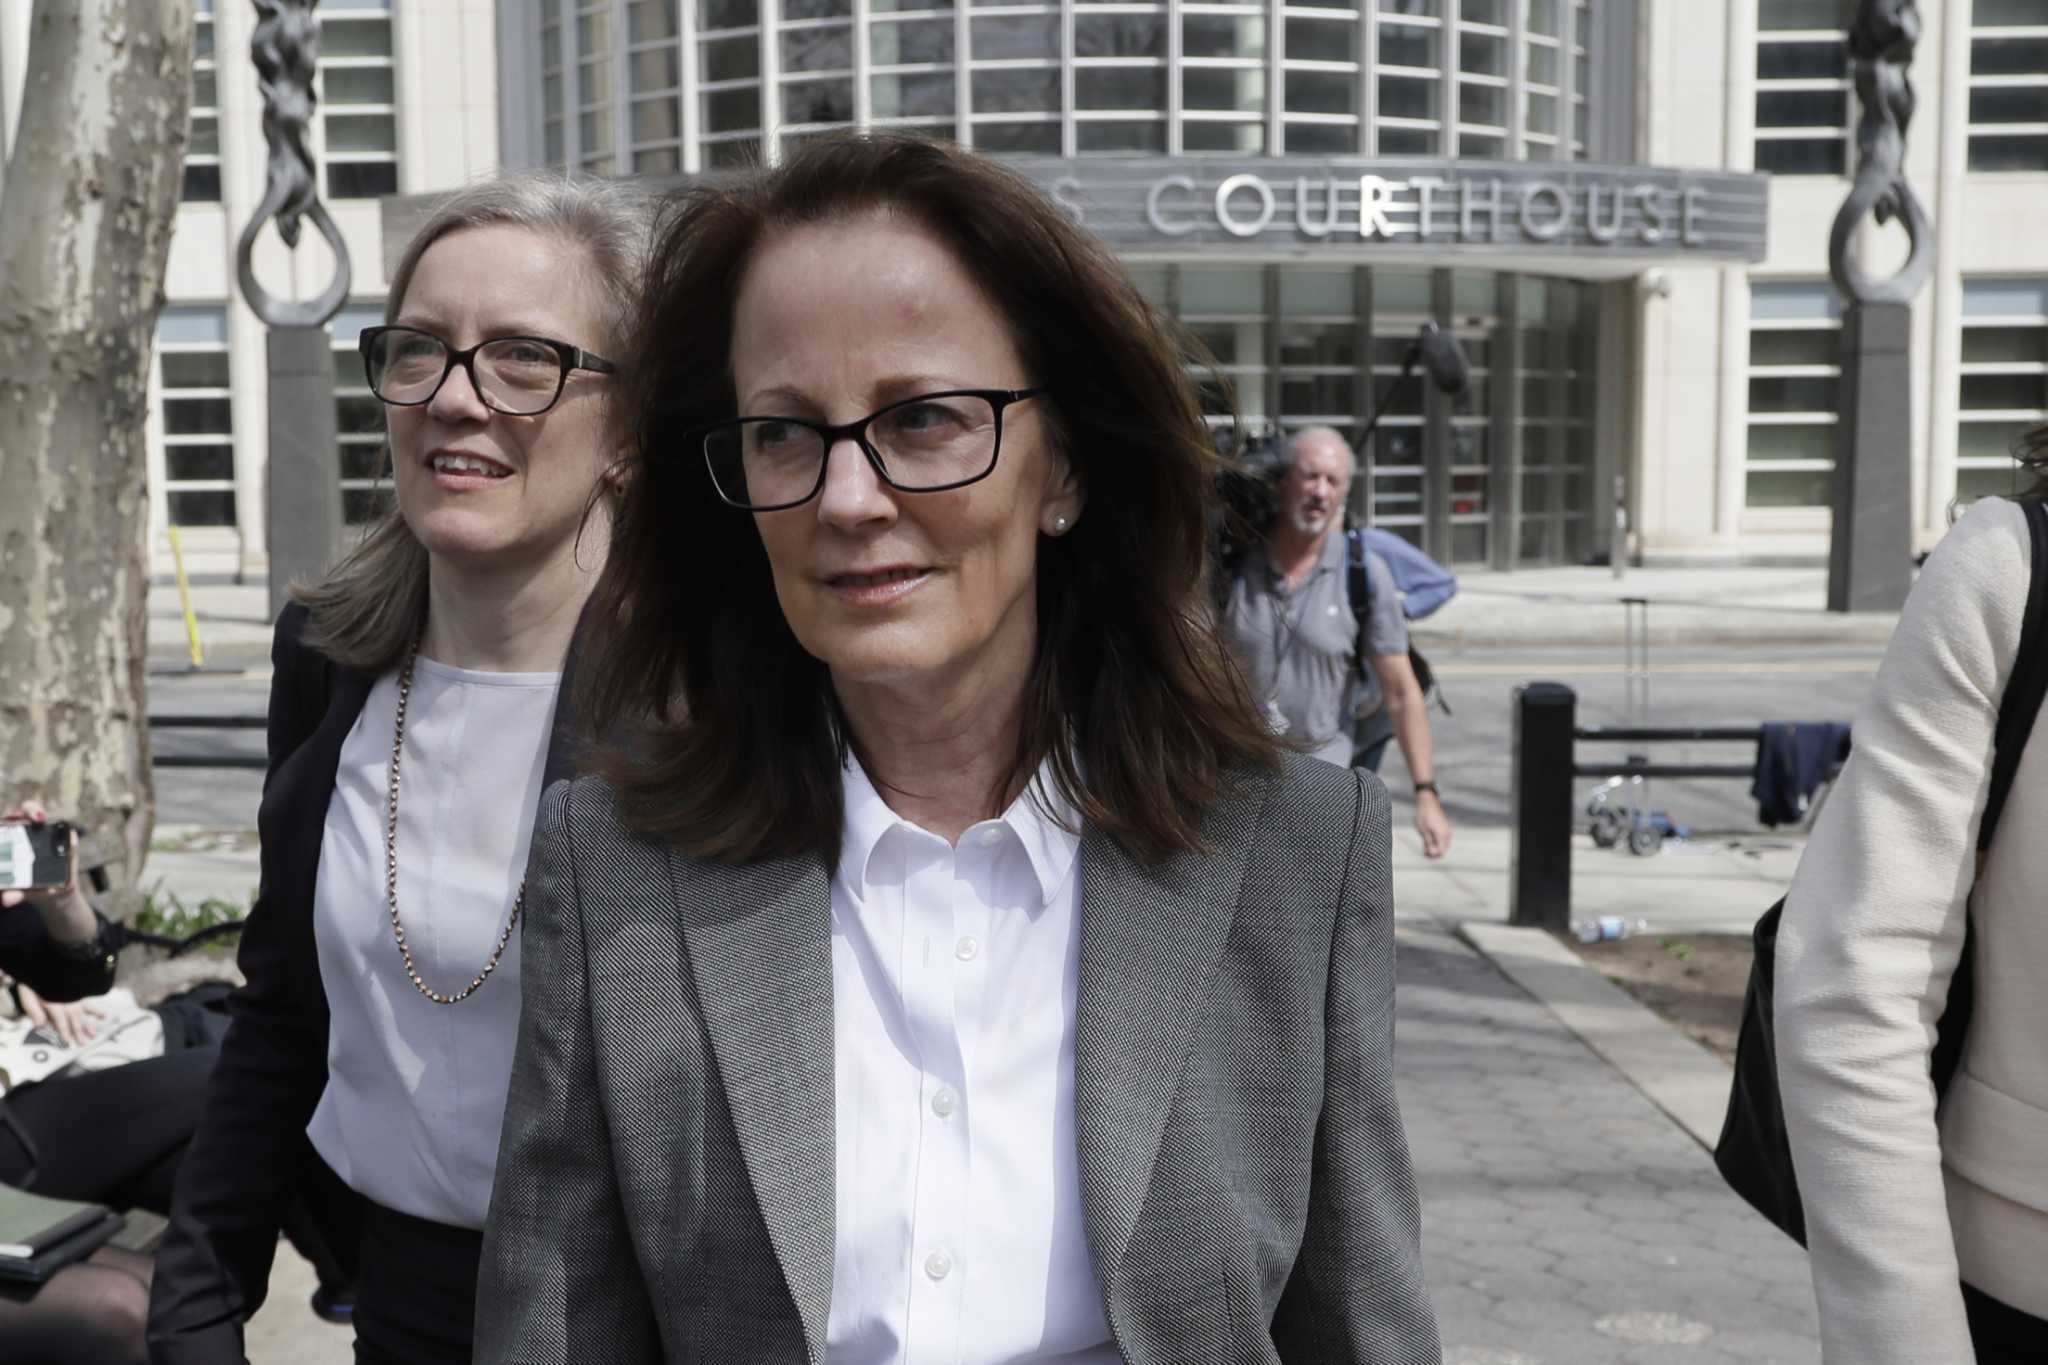 Little-known bookkeeper Kathy Russell will be final defendant sentenced in NXIVM case pic